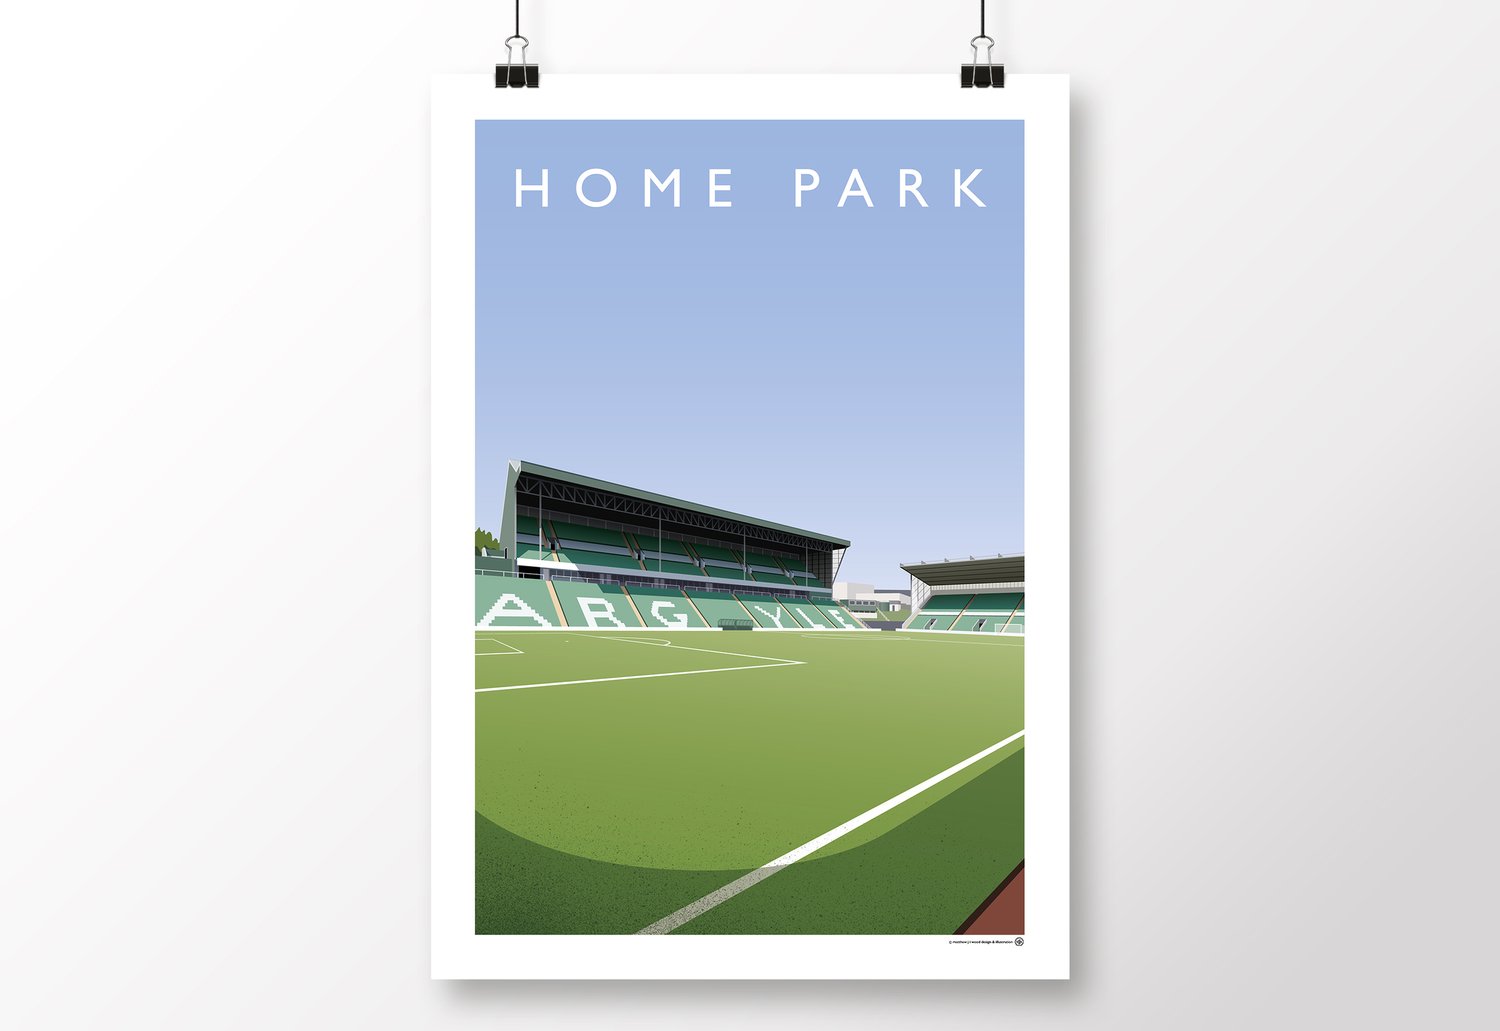 Plymouth Argyle The Champions 22/23 Poster